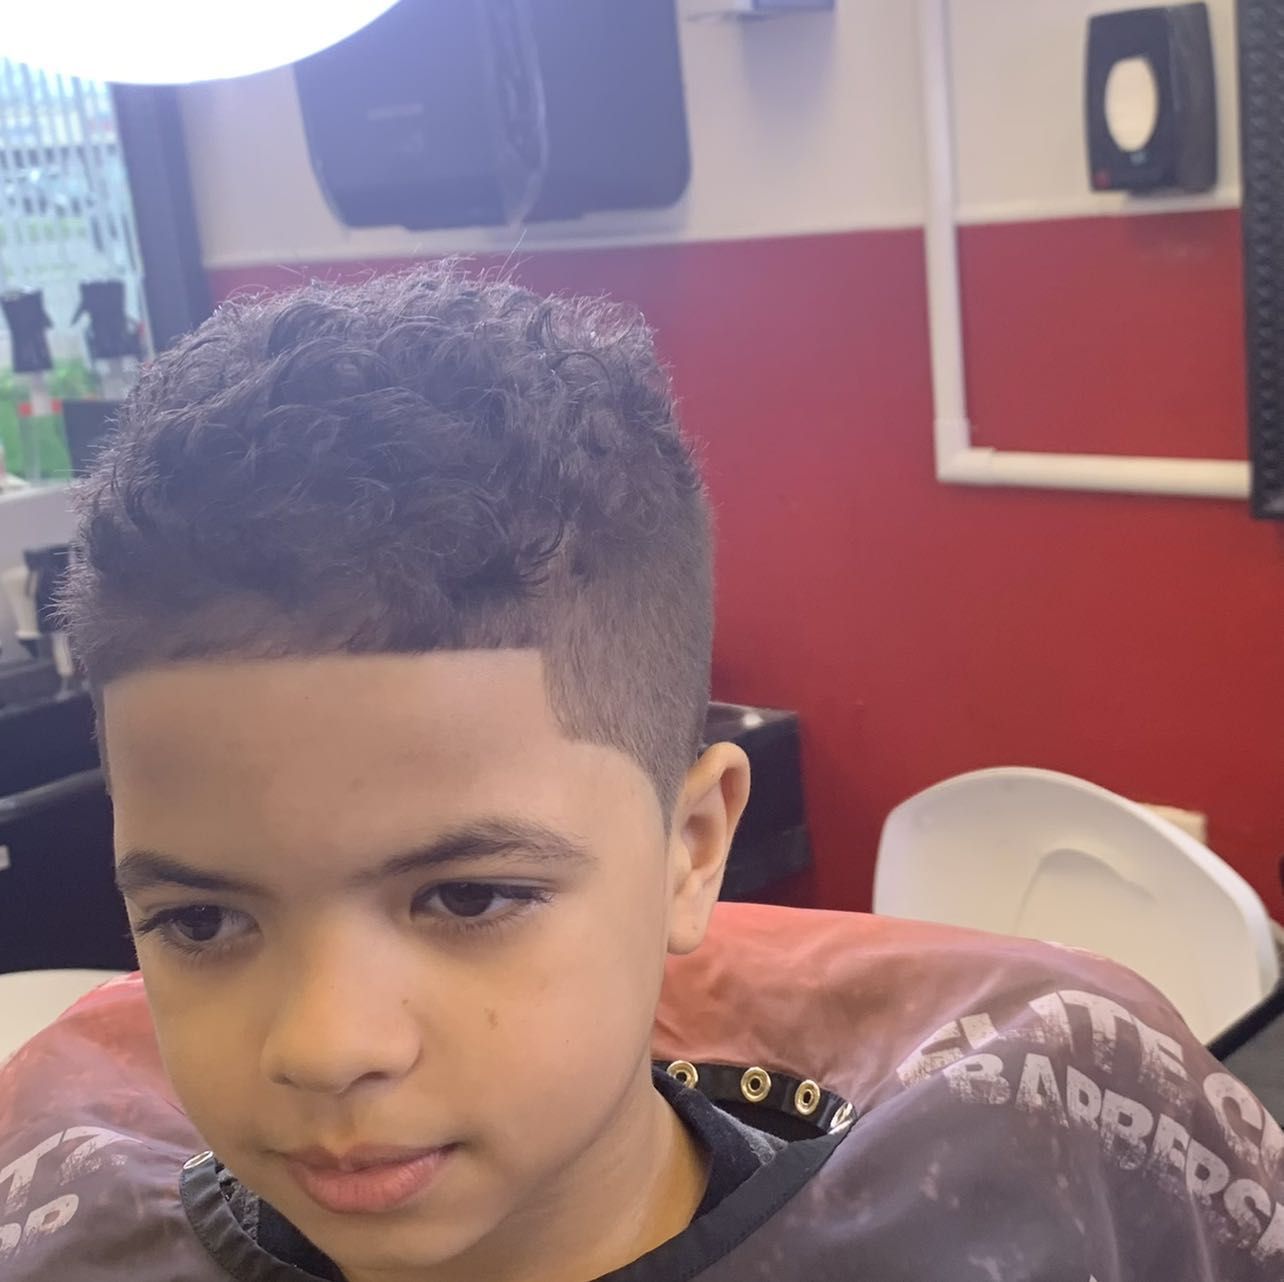 Young mens haircut (2 - 17) years old portfolio